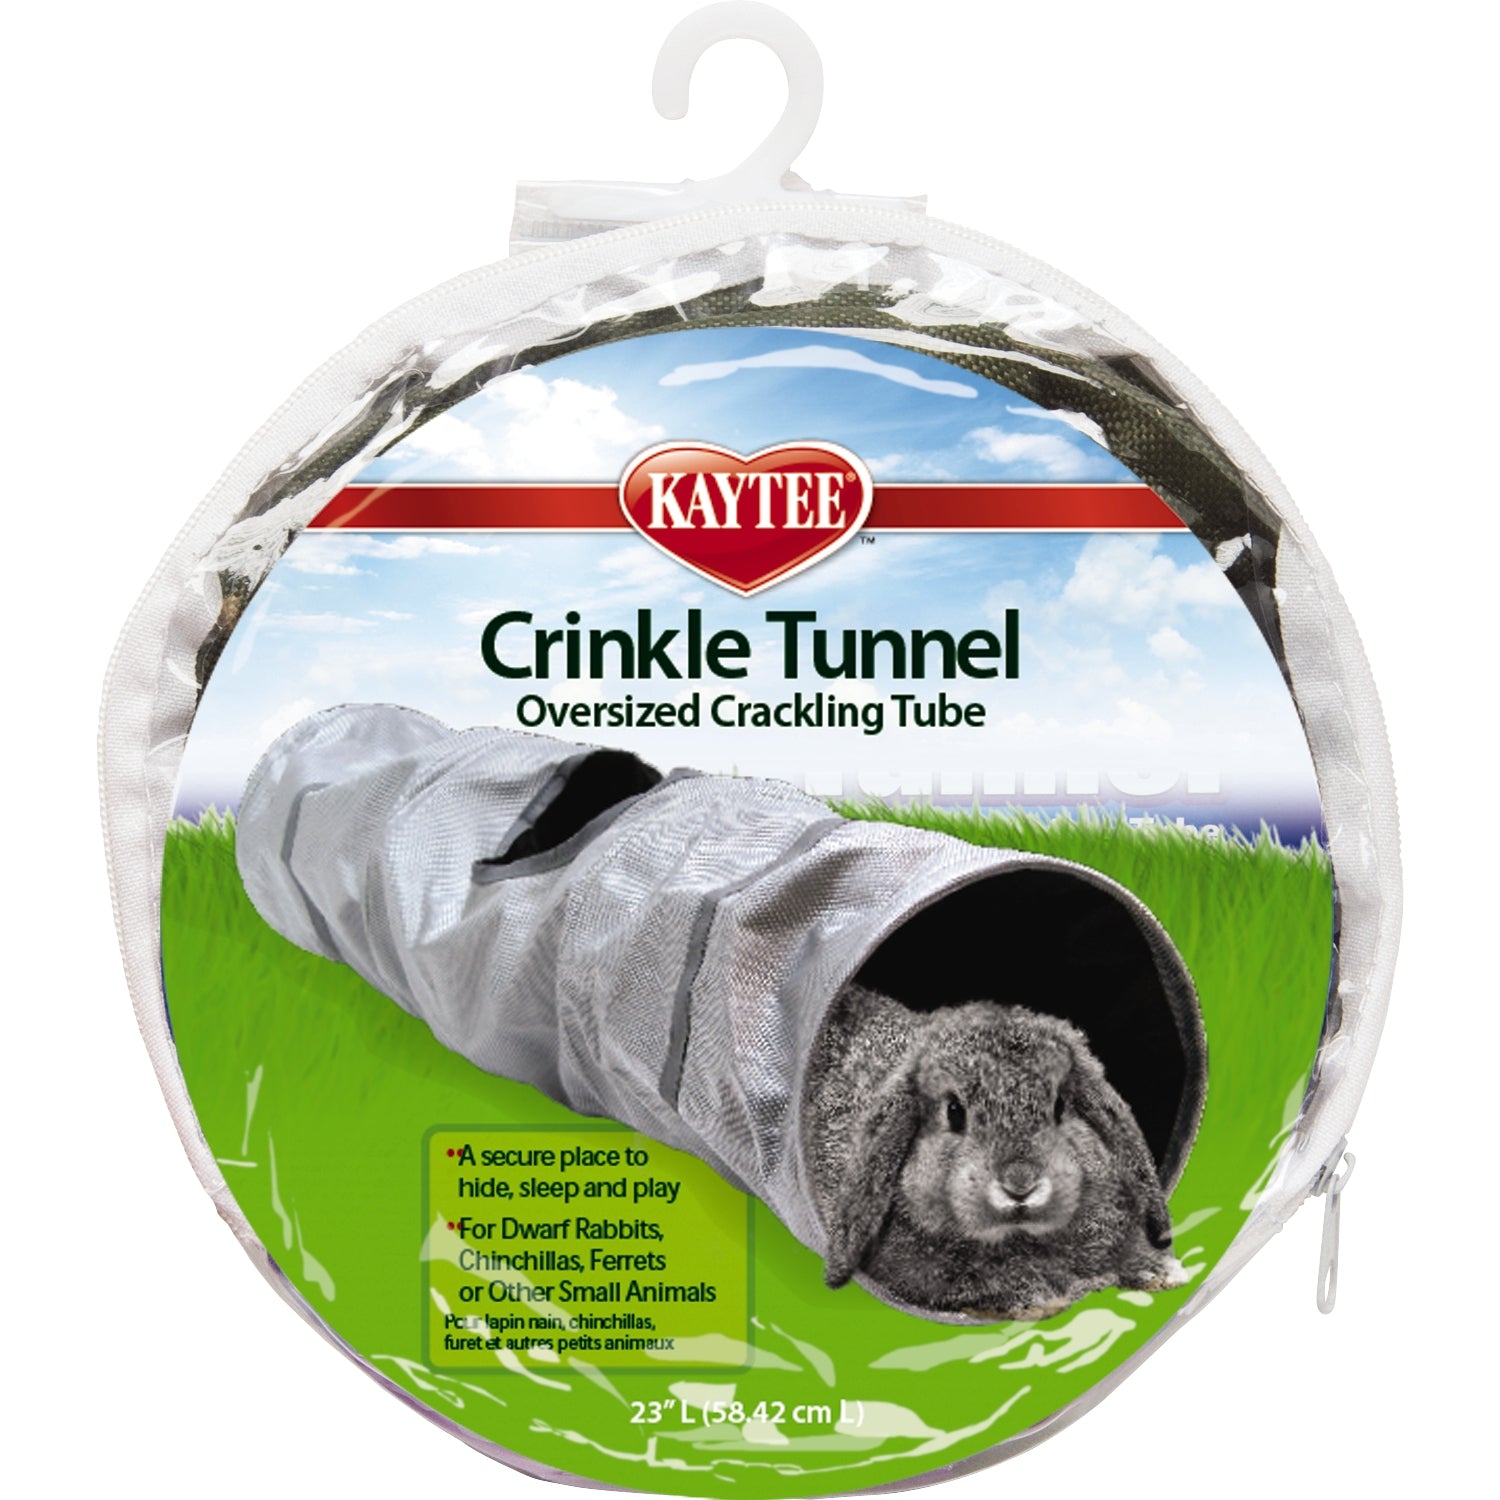 Kaytee Crinkle Tunnel Oversized Crinkling Tube for Small Pets